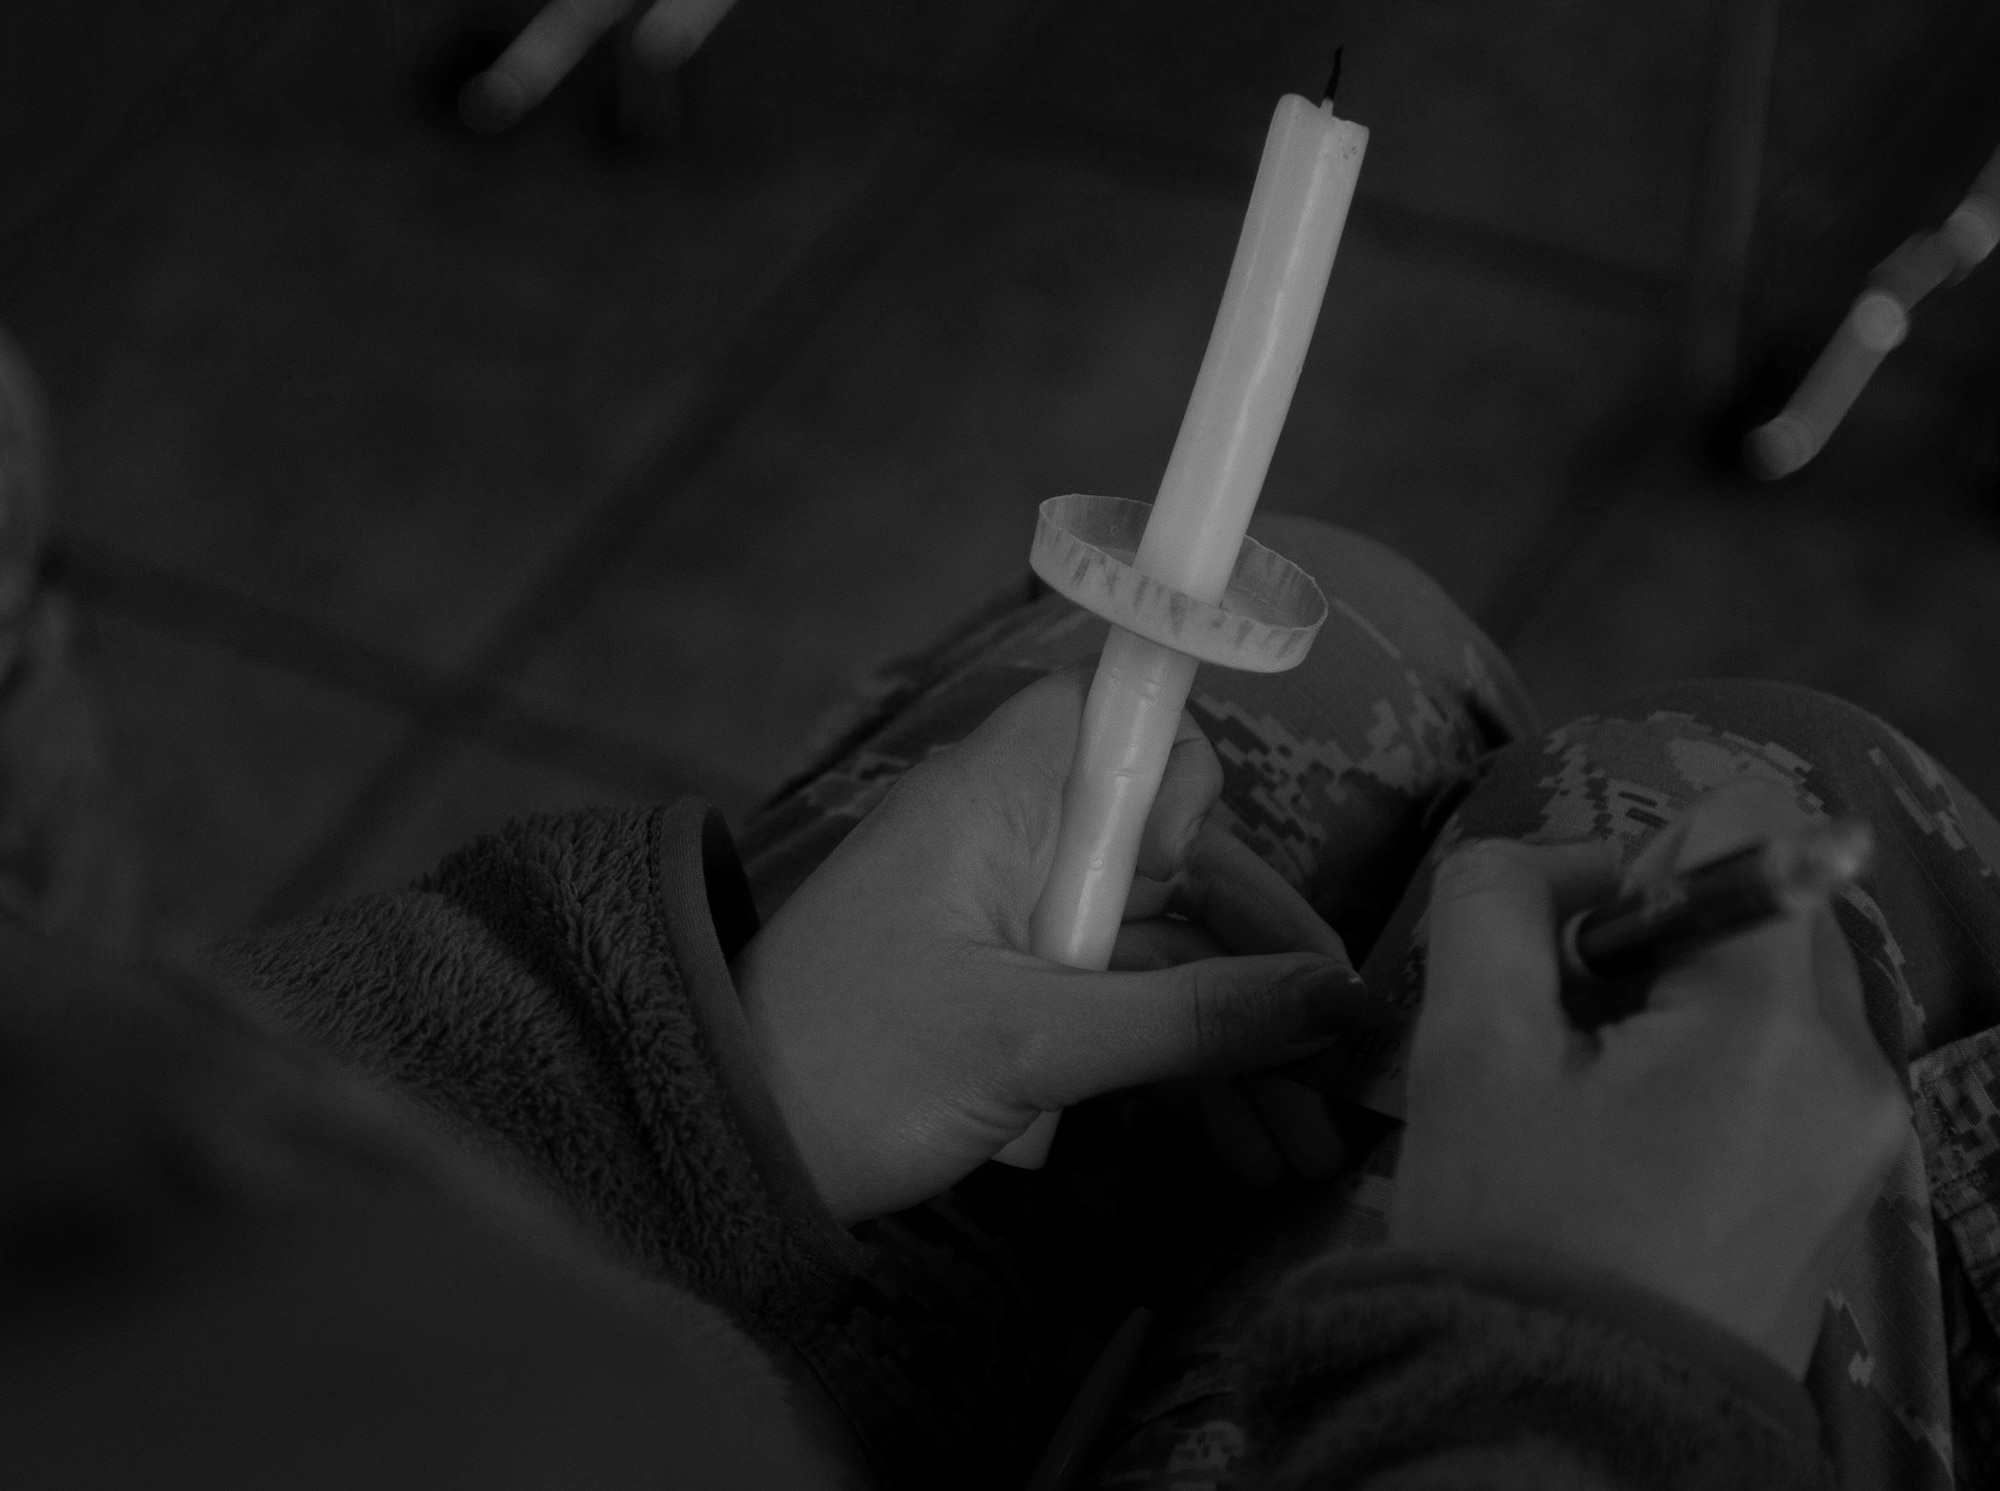 A participant attending a candlelight vigil writes down the name belonging to a victim of interpersonal violence at Ramstein Air Base, Germany, Oct. 27, 2016. Those who took part in the vigil put the names they’d written into a glass jar and then lit their candle they were given by one of the four differently-marked candles surrounding the jar. According to the Center for Disease Control and Prevention, over the course of a year, more than 10 million U.S. citizens are victims of domestic violence, sexual abuse, child violence and bullying or suicide. The devastating physical, emotional, and psychological consequences of interpersonal violence can cross generations and last lifetimes. (U.S. Air Force photo by Airman 1st Class Lane T. Plummer)